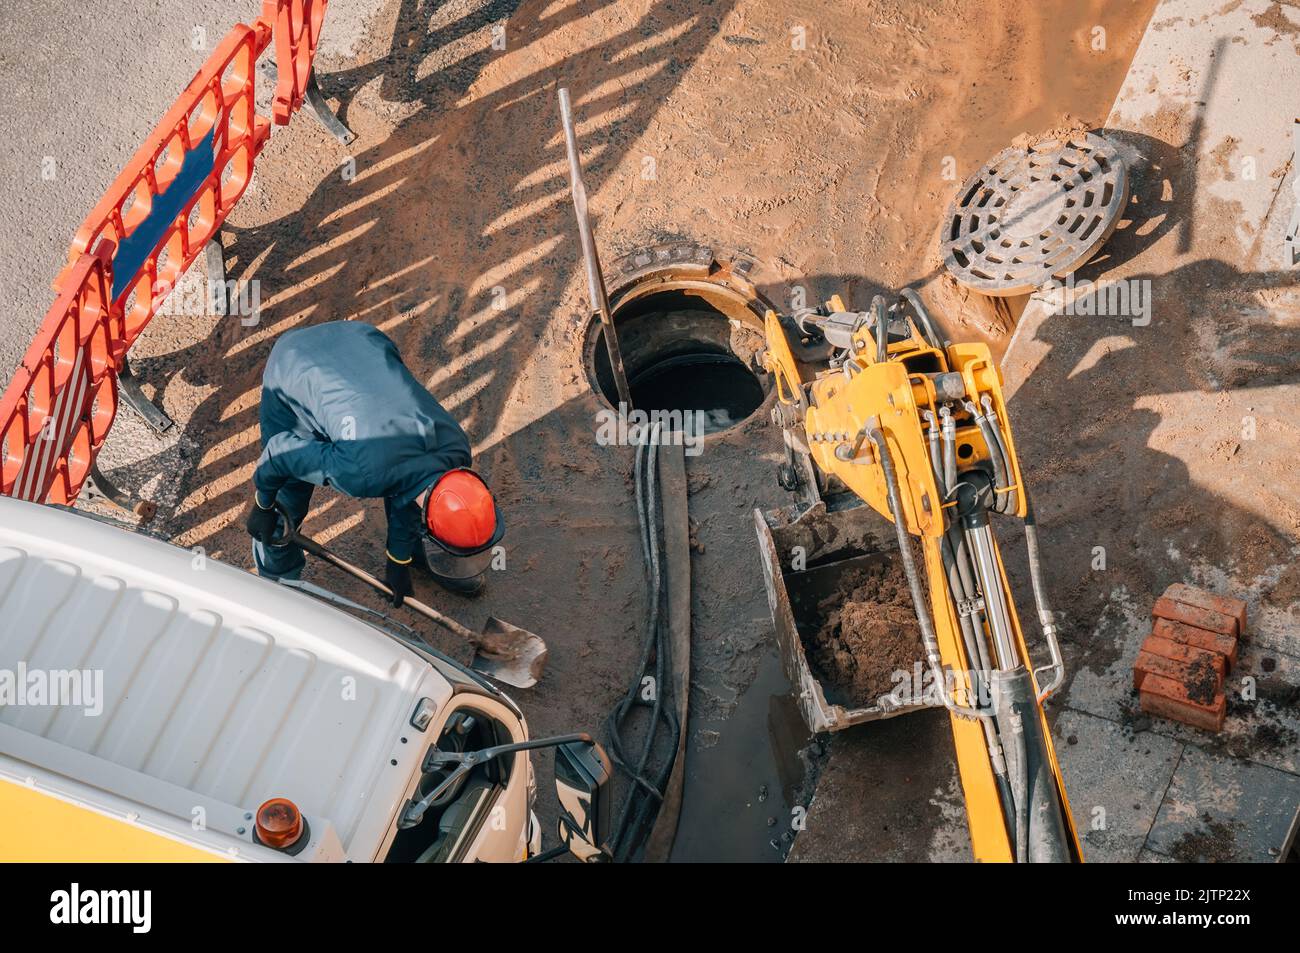 Worker carries out cleaning, repair and maintenance of outdoor street sewers. Stock Photo